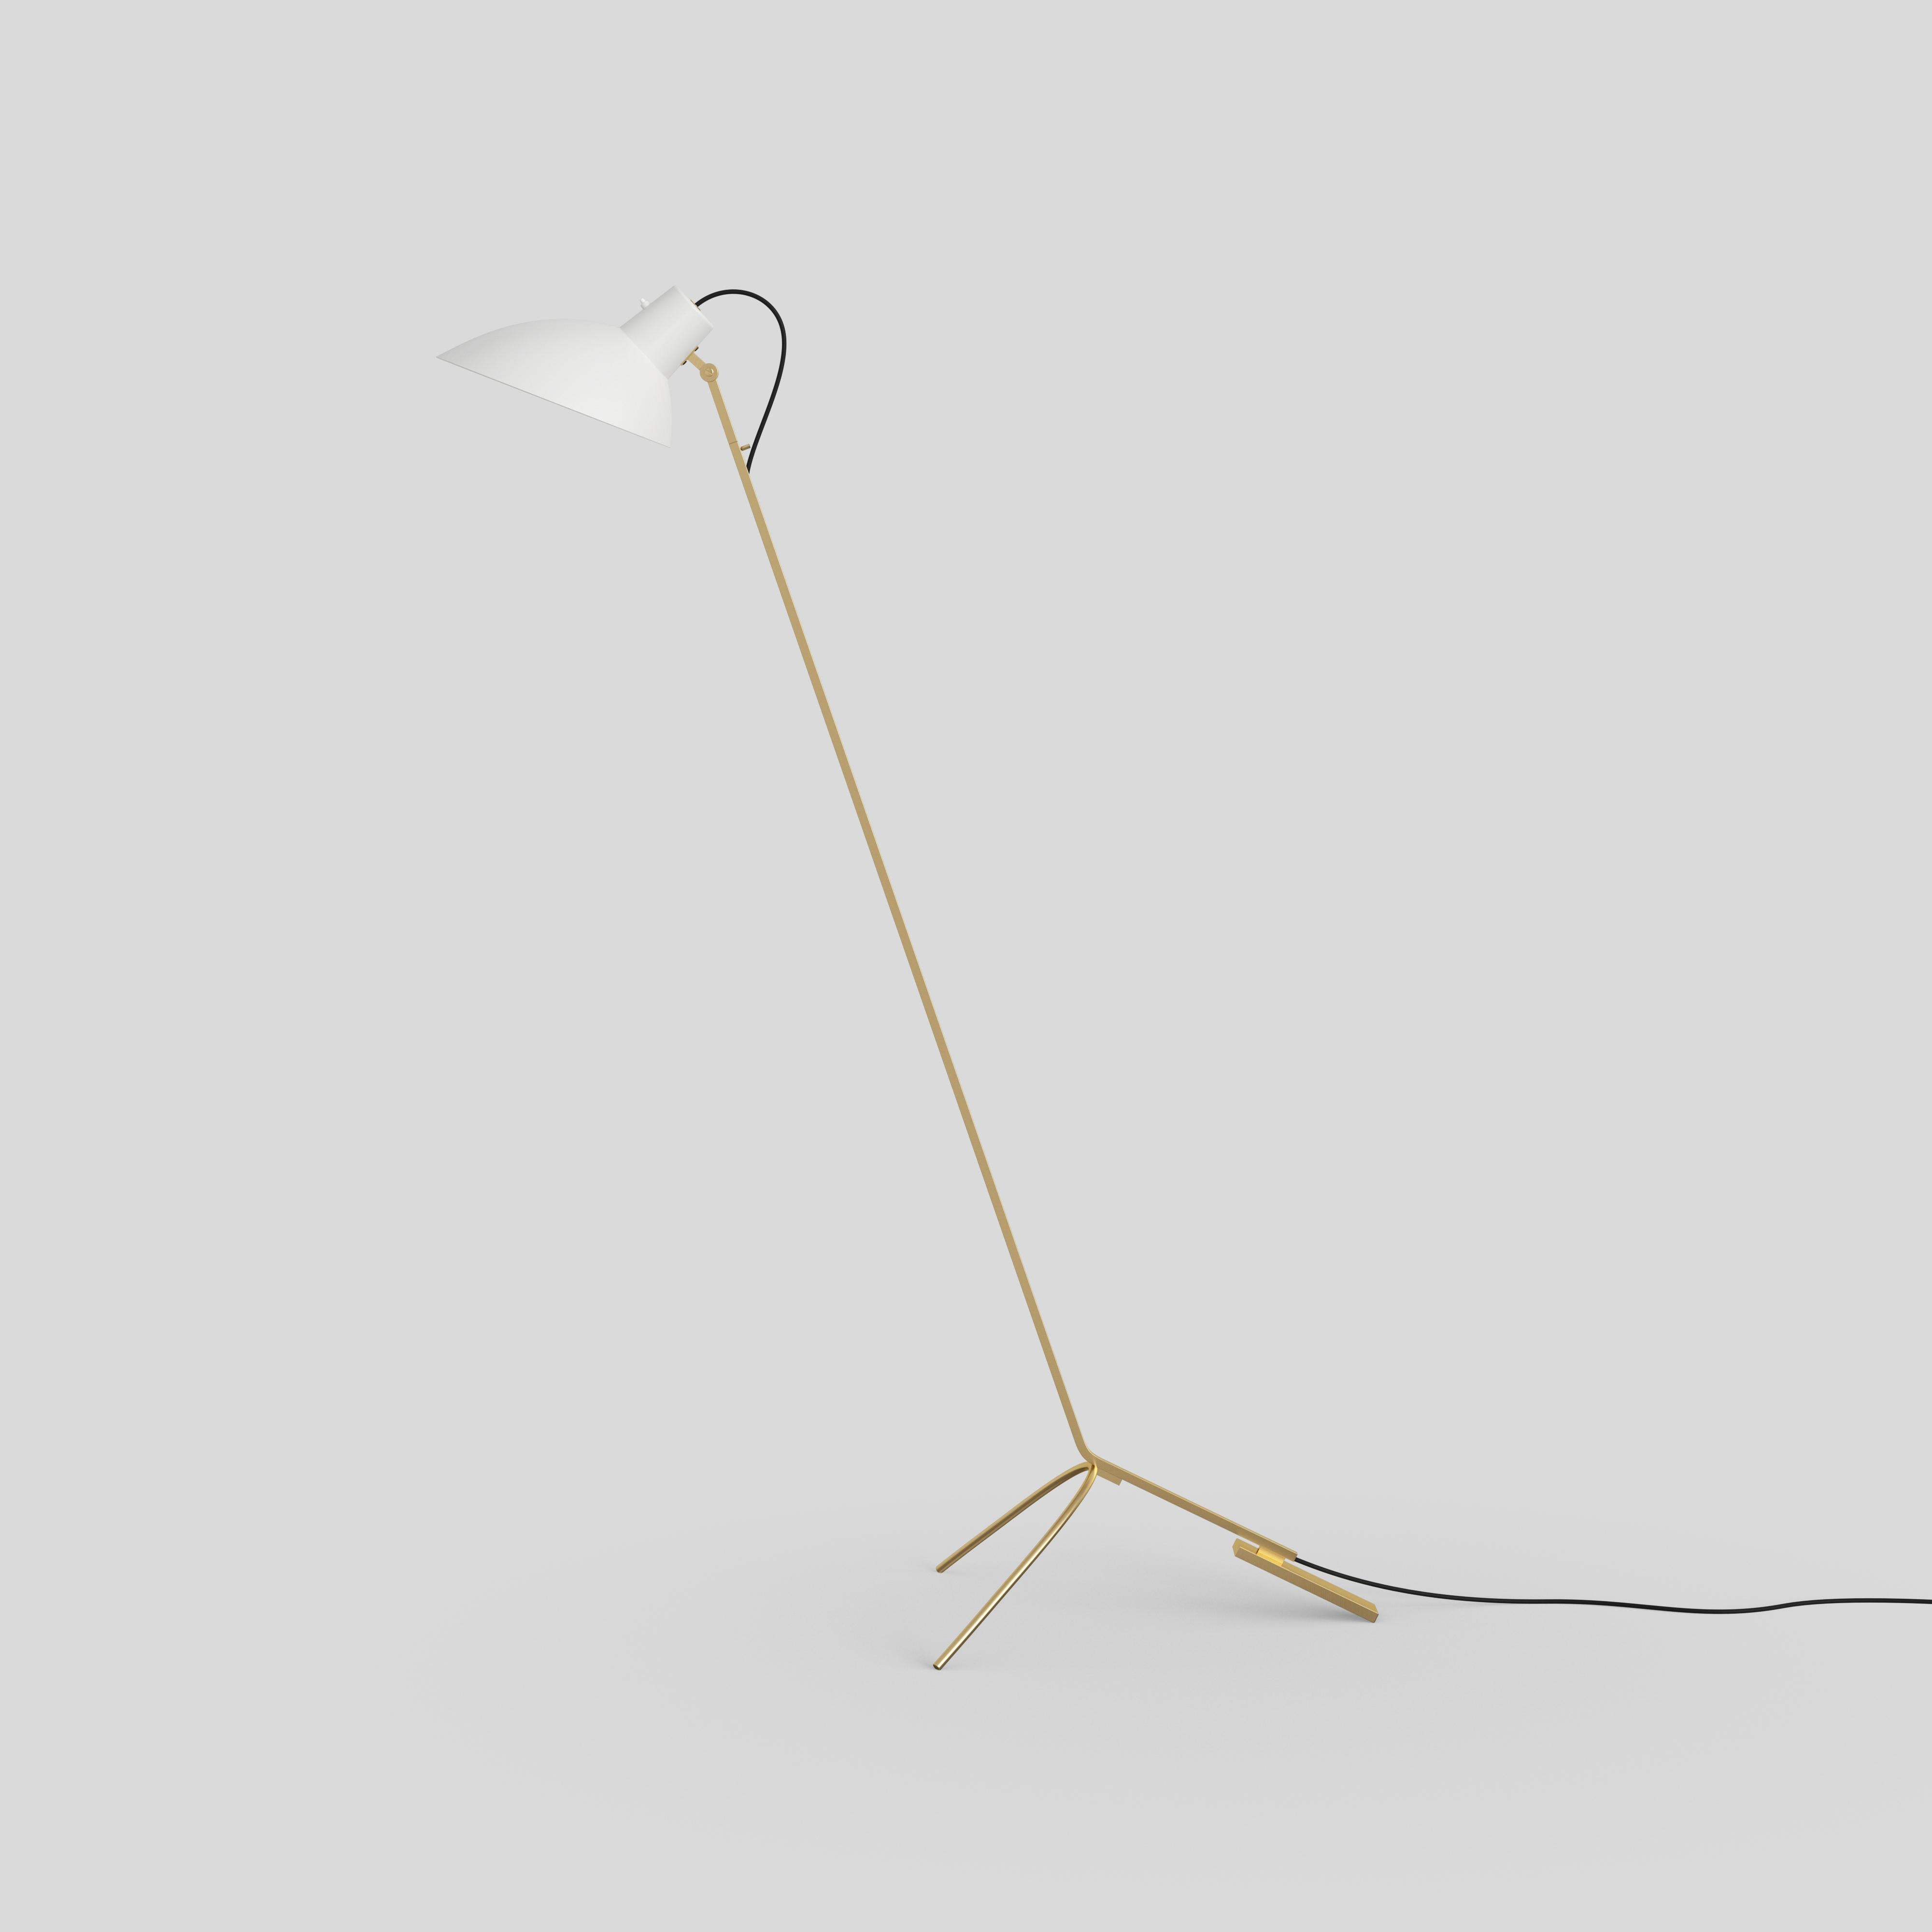 VV Cinquanta floor lamp
Design by Vittoriano Viganò
This version is with white lacquered reflector and brass frame.

The VV Cinquanta features an elegant and versatile posable direct light source that can swivel and tilt, from direct working light